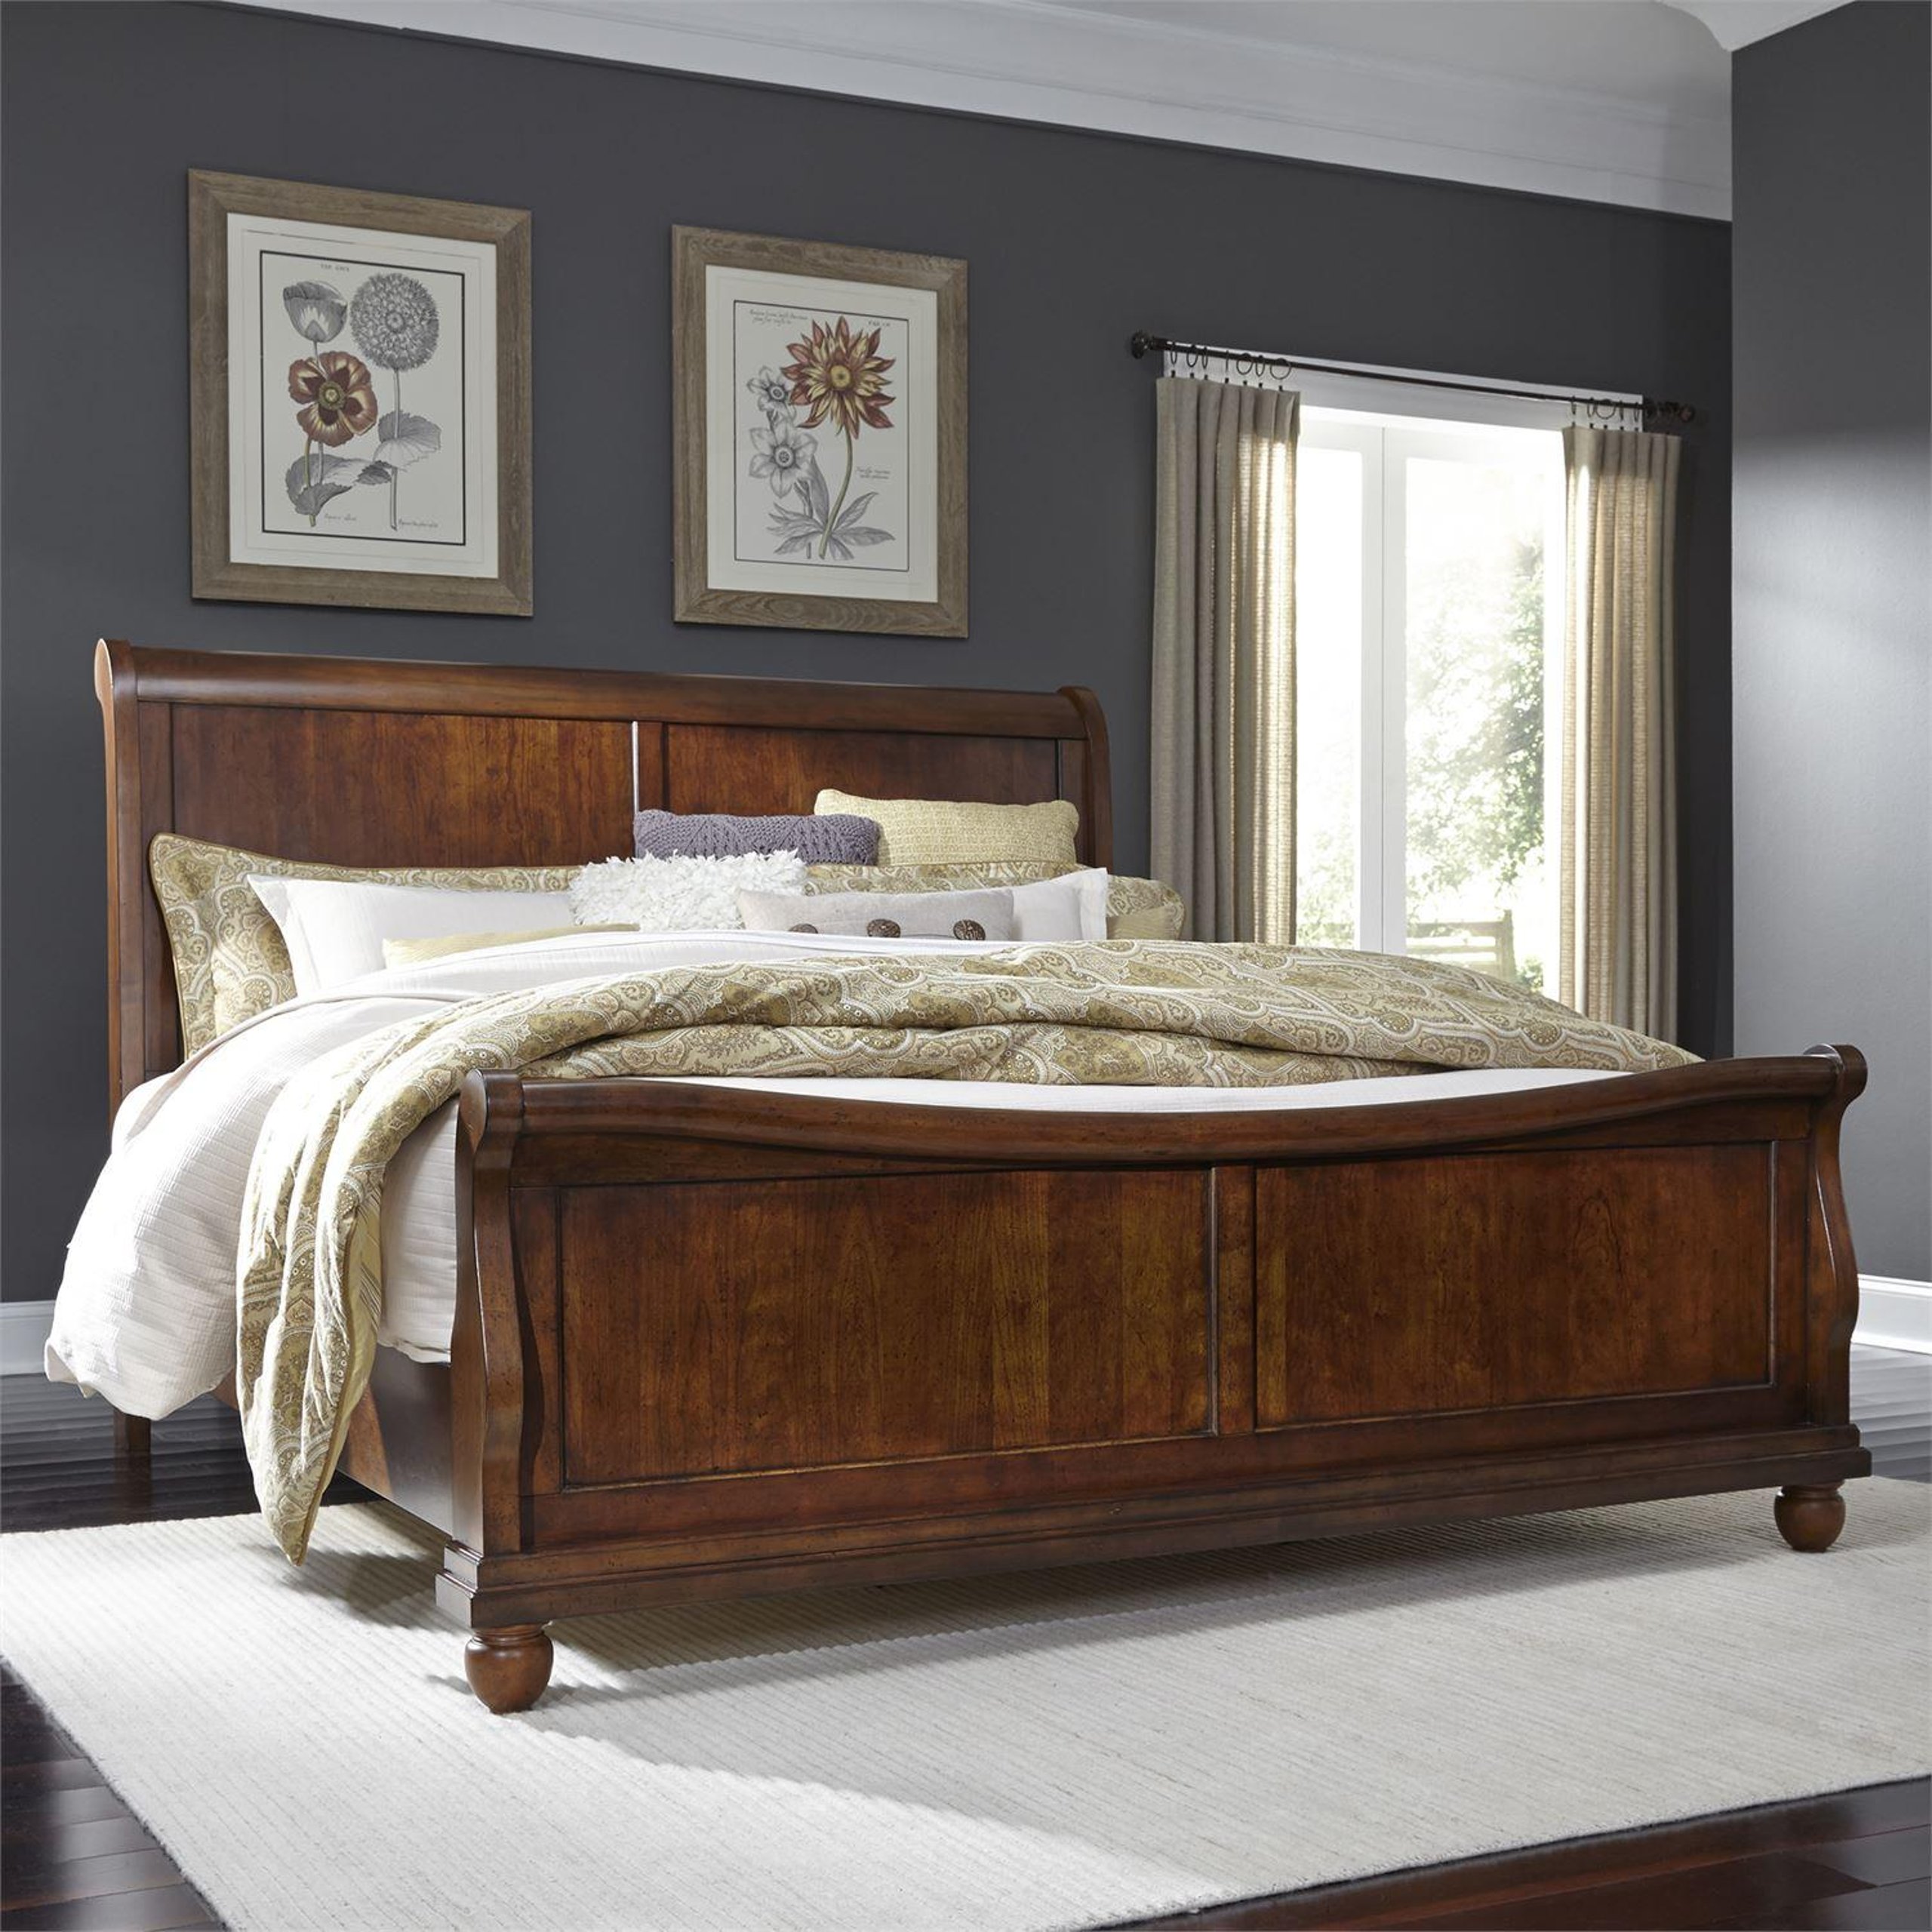 Cherry Finish Queen Sleigh Bed Rustic Traditions 589 Br Liberty Furniture Buy Online On Ny